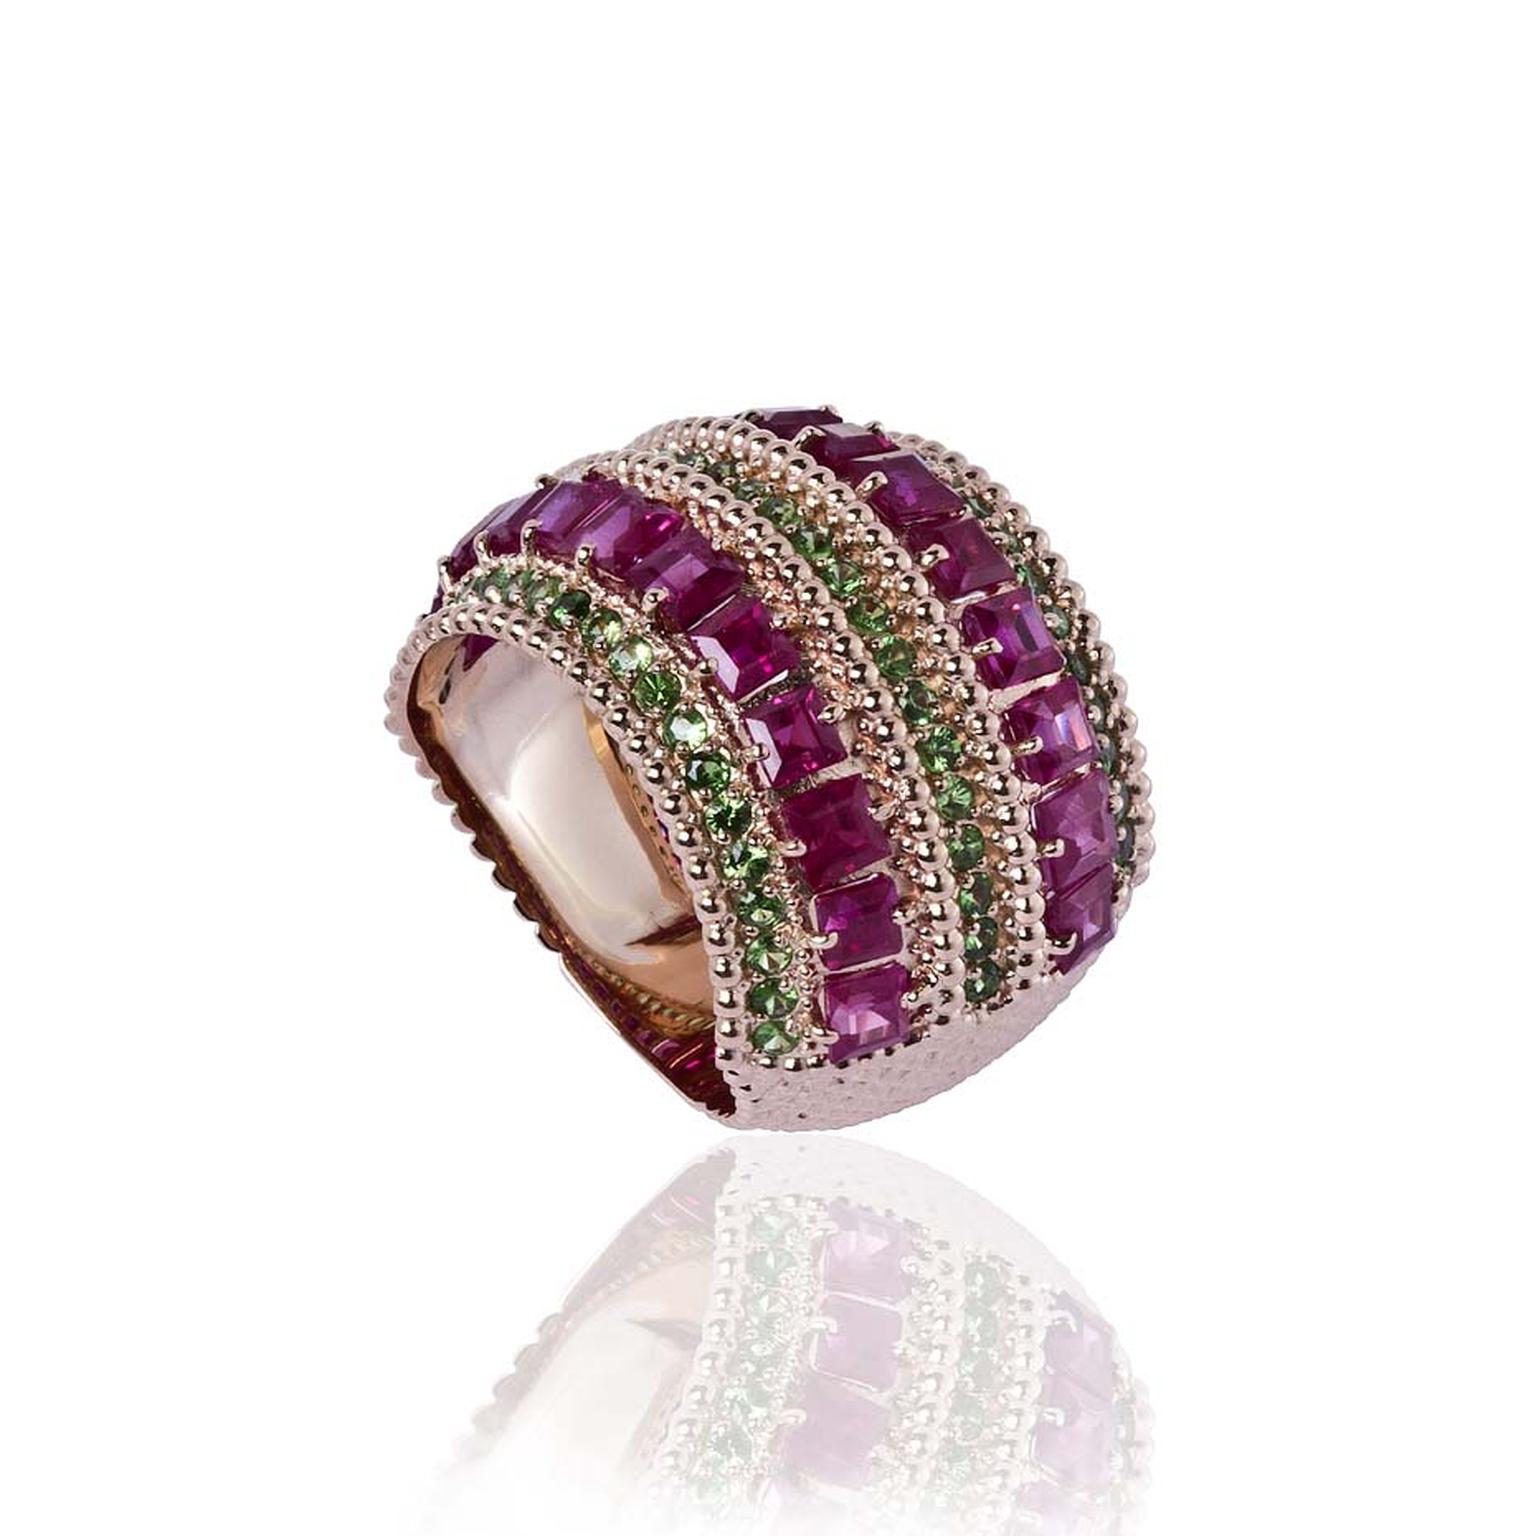 Carla Amorim Russia Collection St Basil ring with rubies and tsavorites, inspired by the brightly painted motifs on the domes of the cathedral